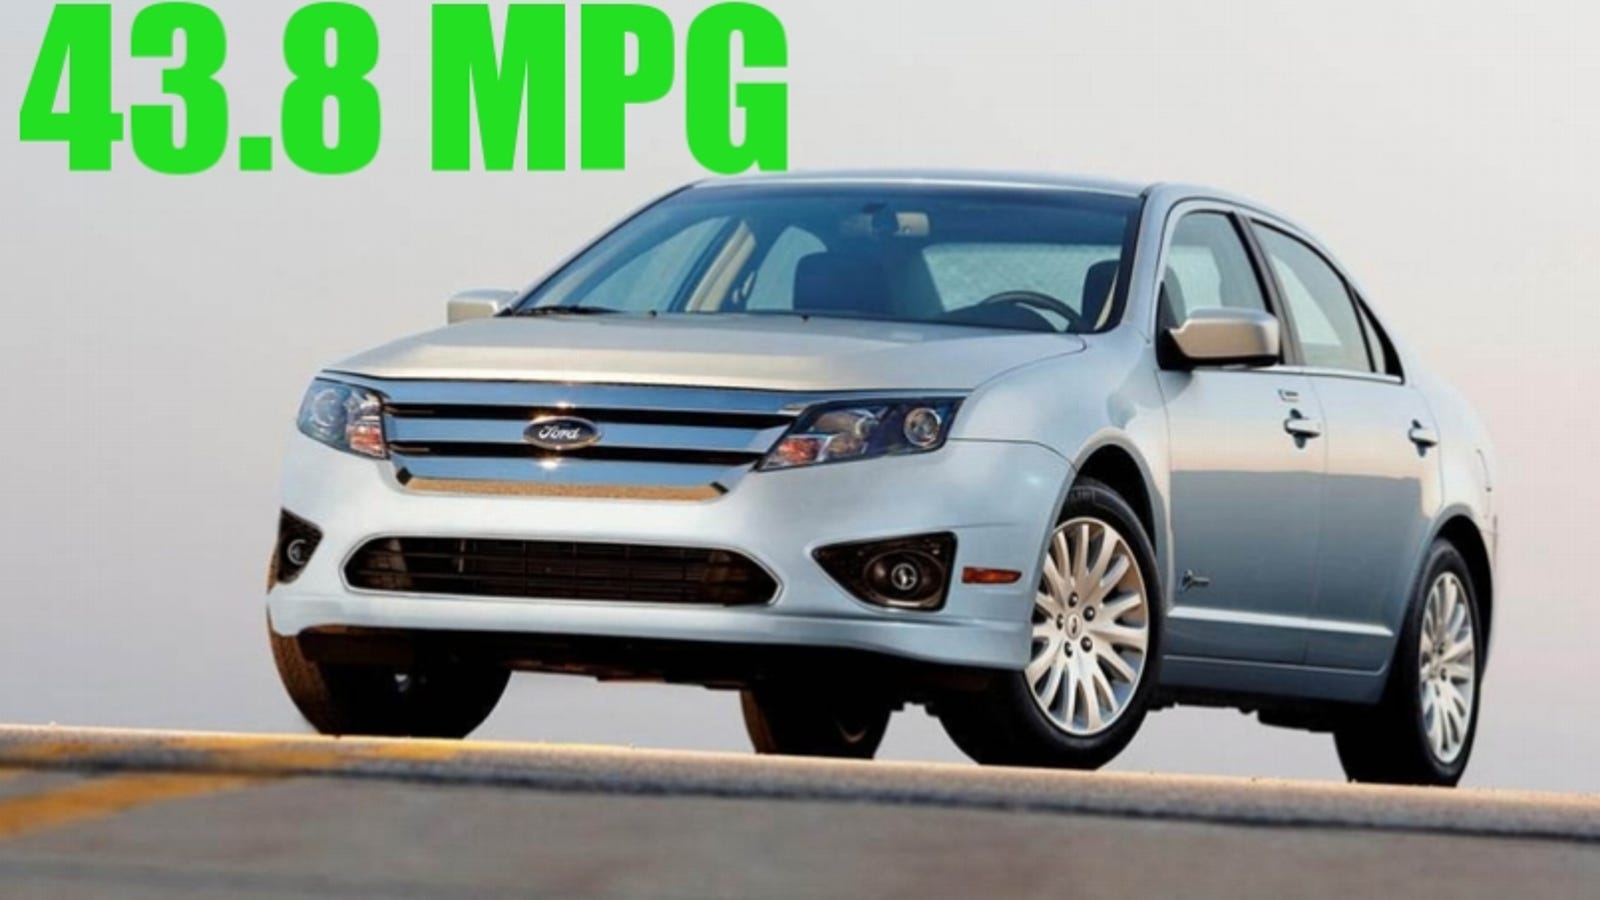 Ford Fusion Hybrid Gets Fuel Economy Rating Of 43.8 MPG In Jalopnik